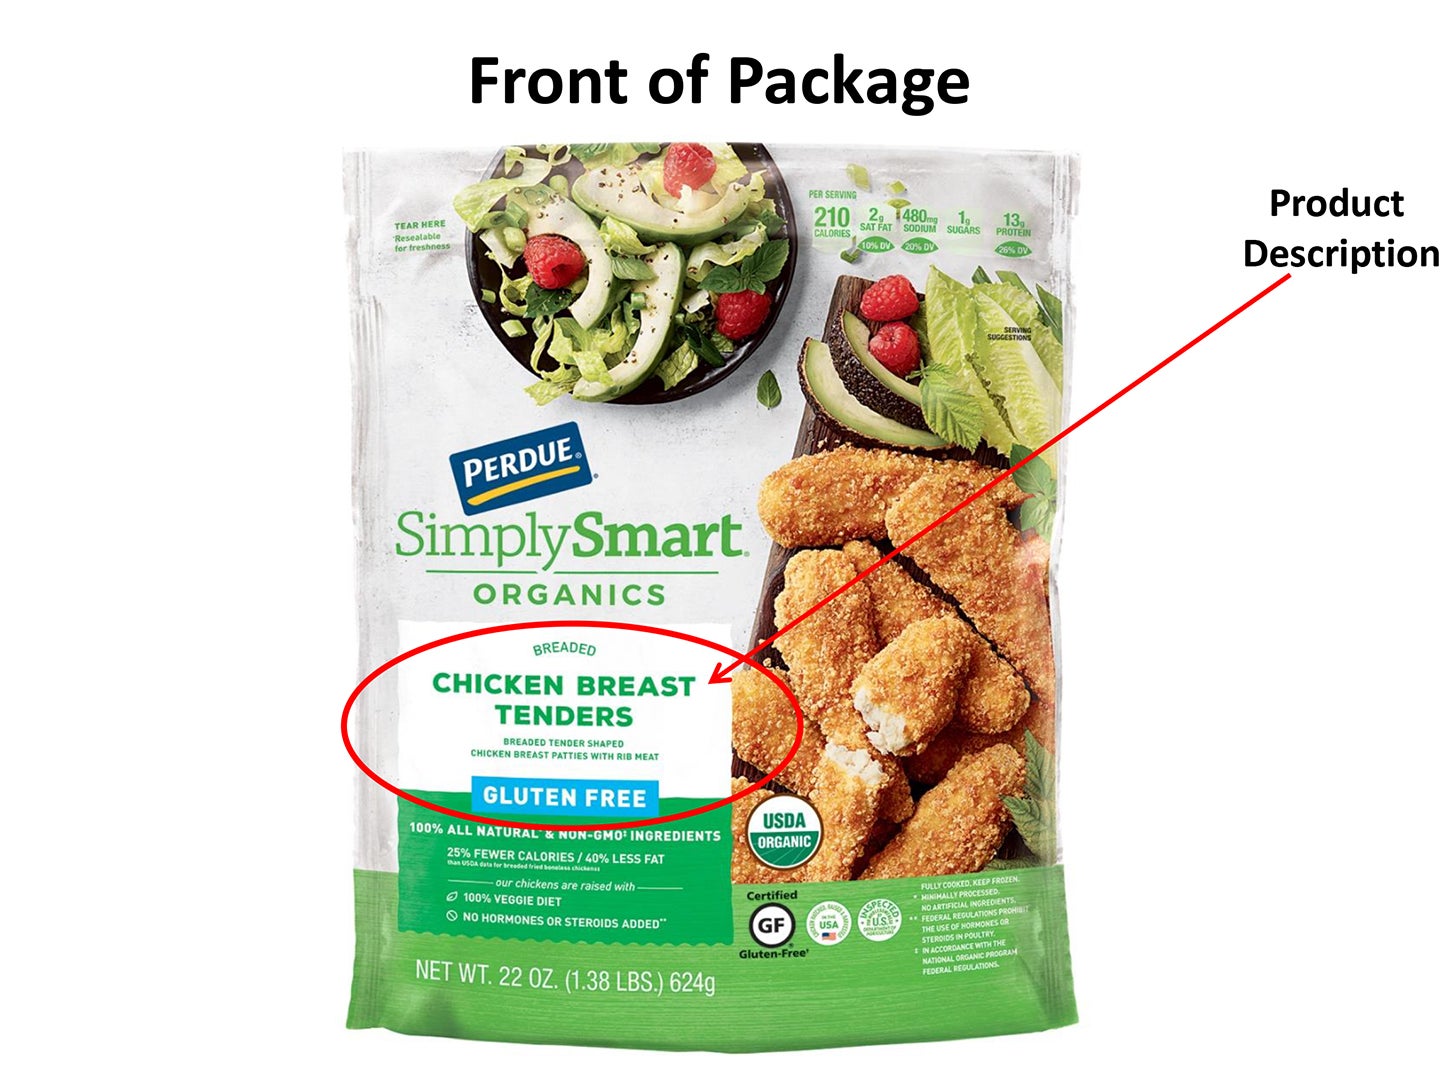 Recall issued on Perdue frozen chicken product The Coastland Times